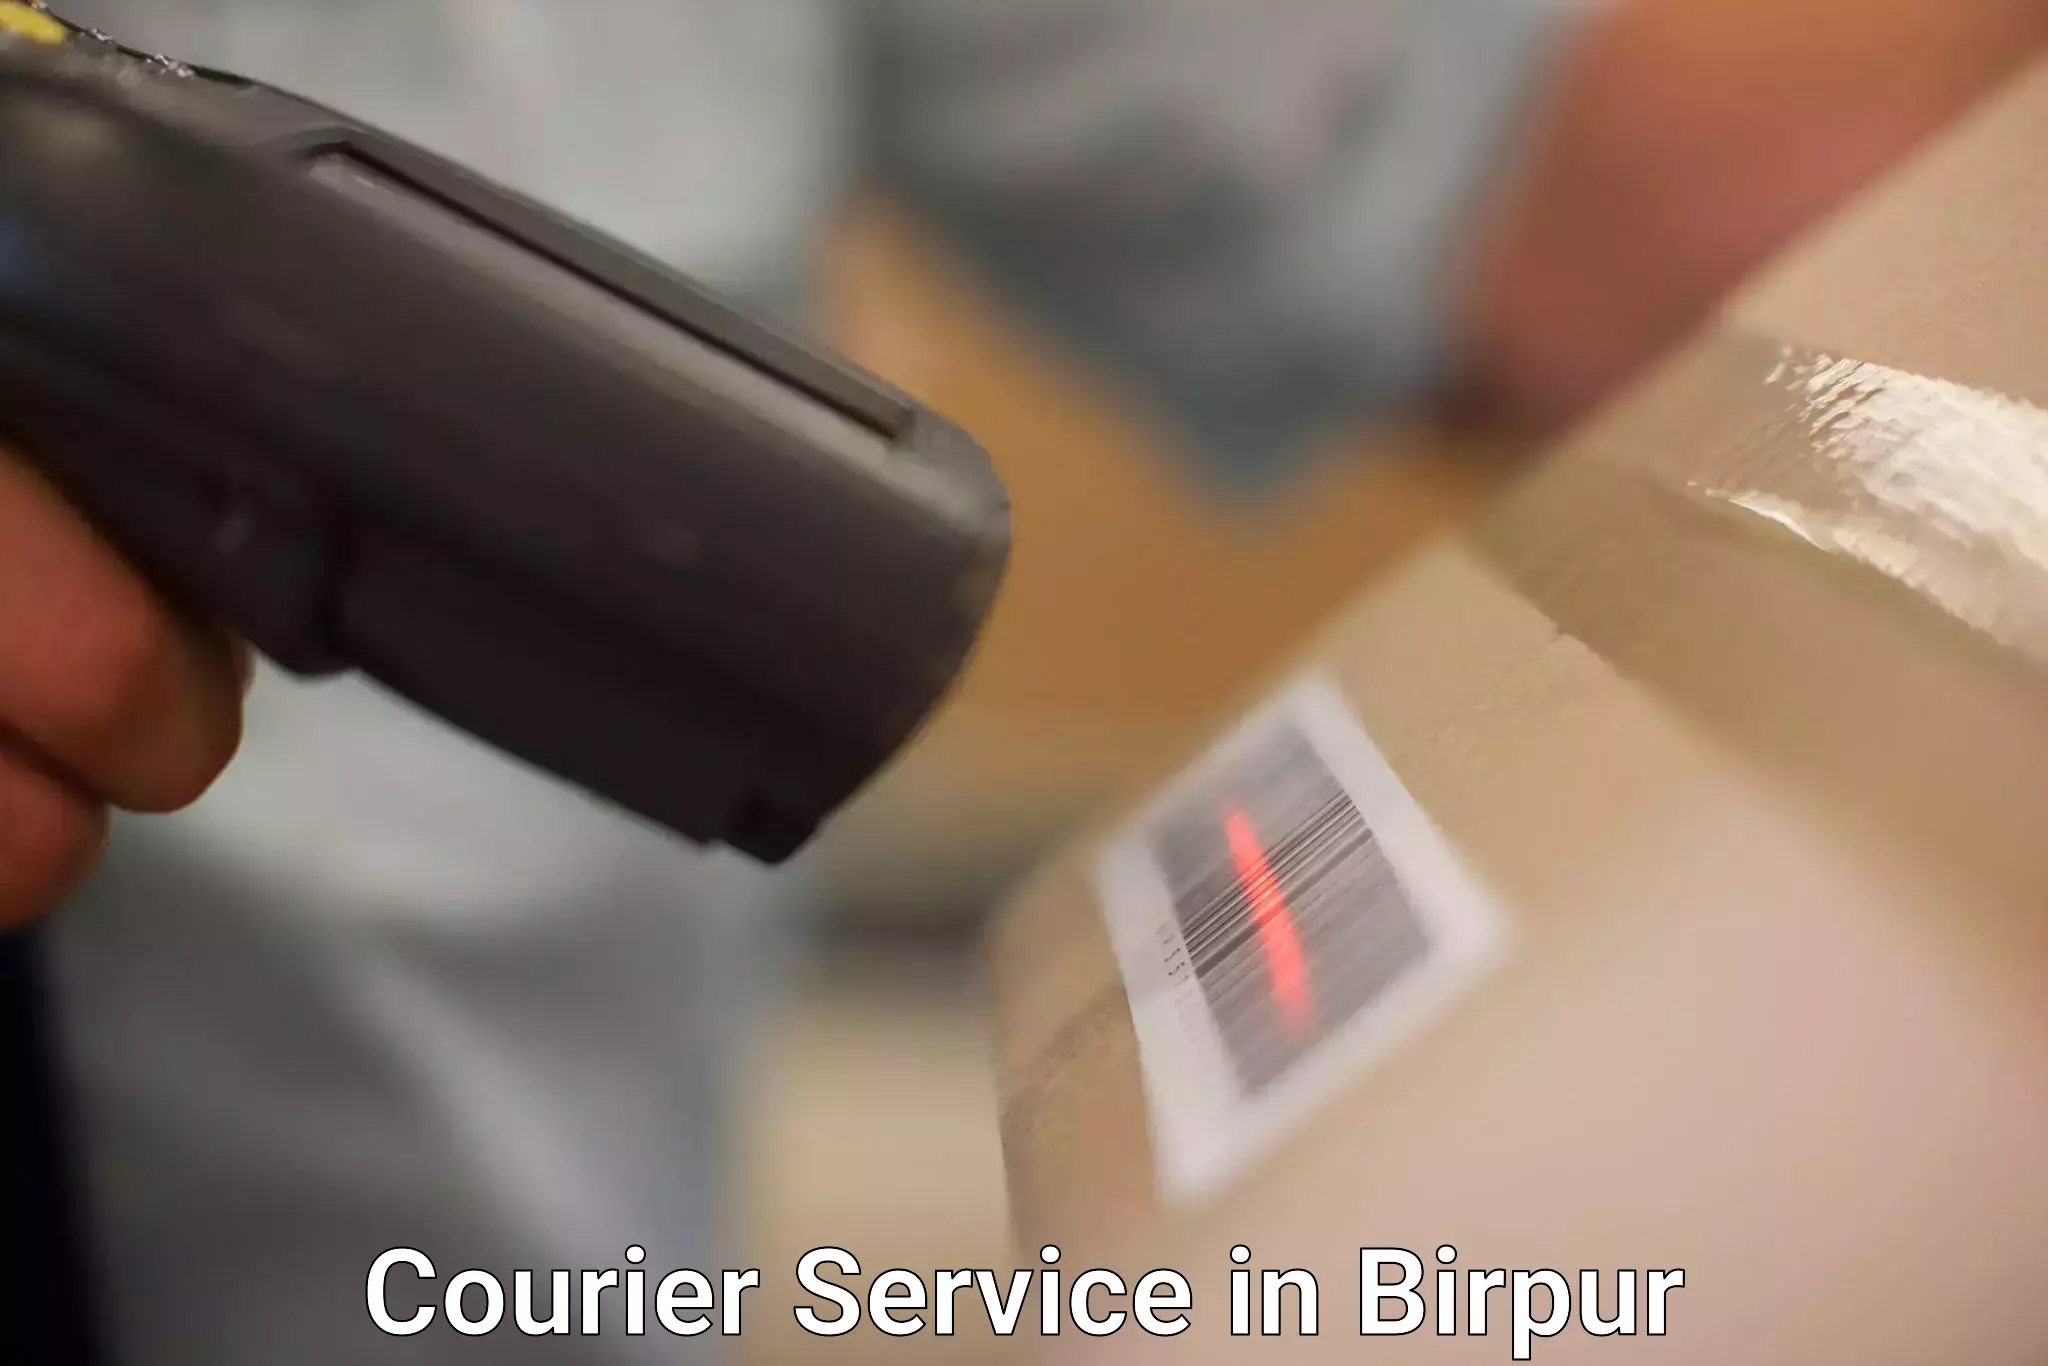 24-hour courier service in Birpur